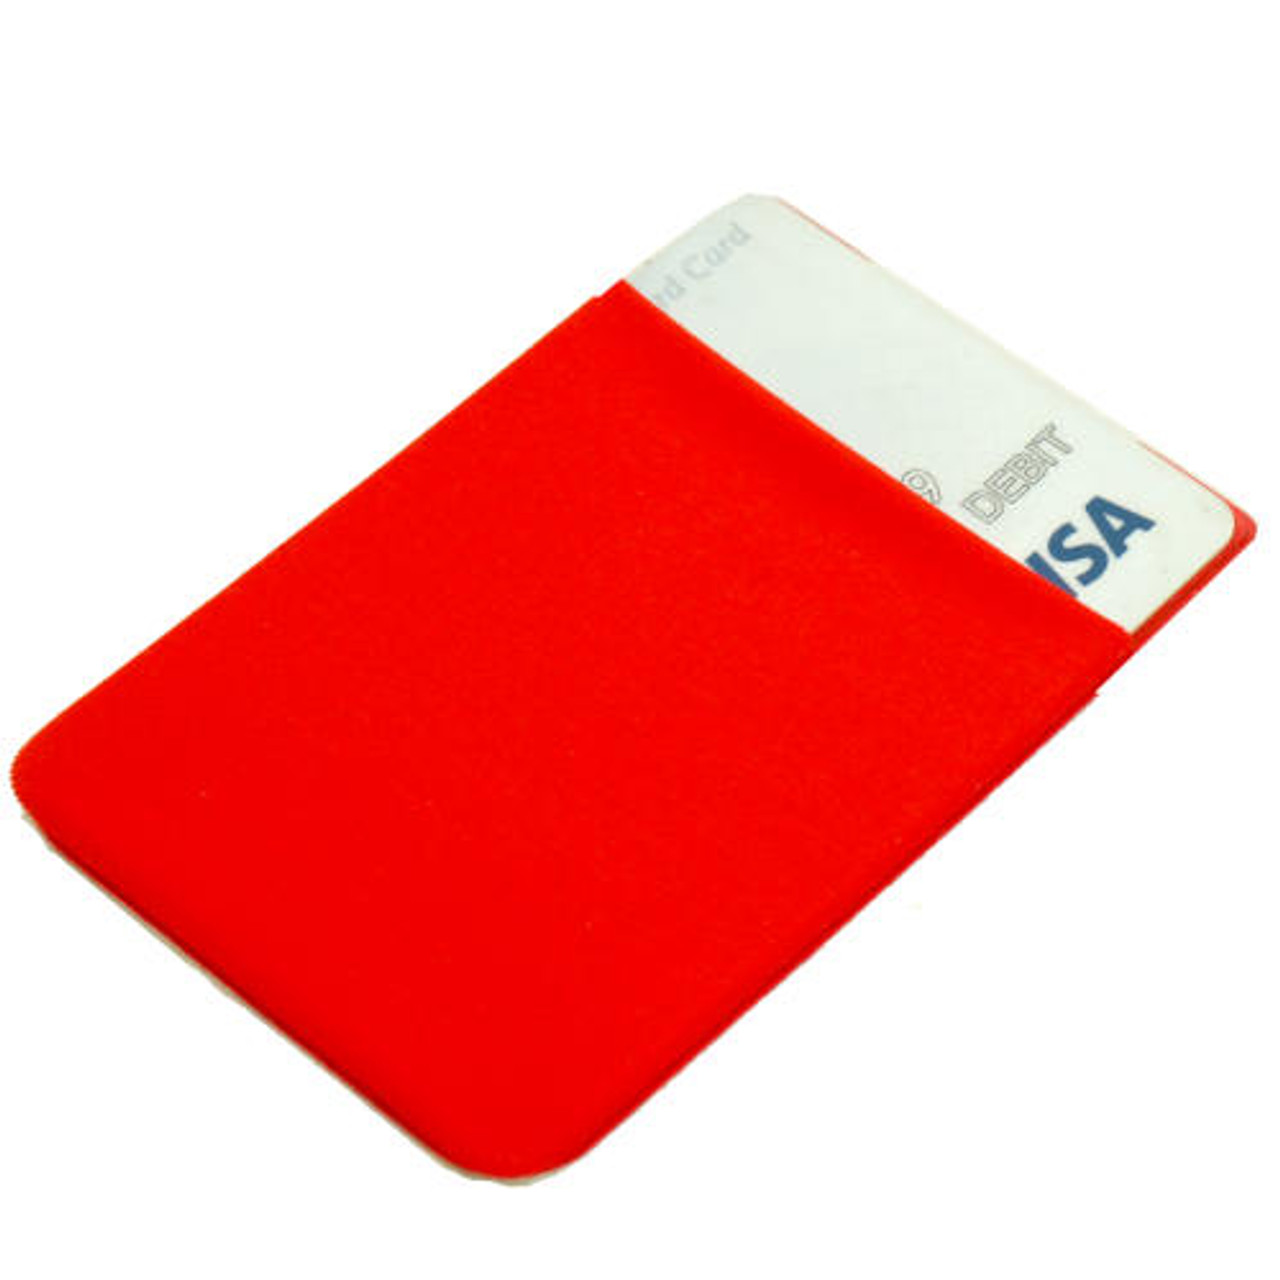 3M ADHESIVE BACKED STRETCHY CREDIT CARD HOLDER